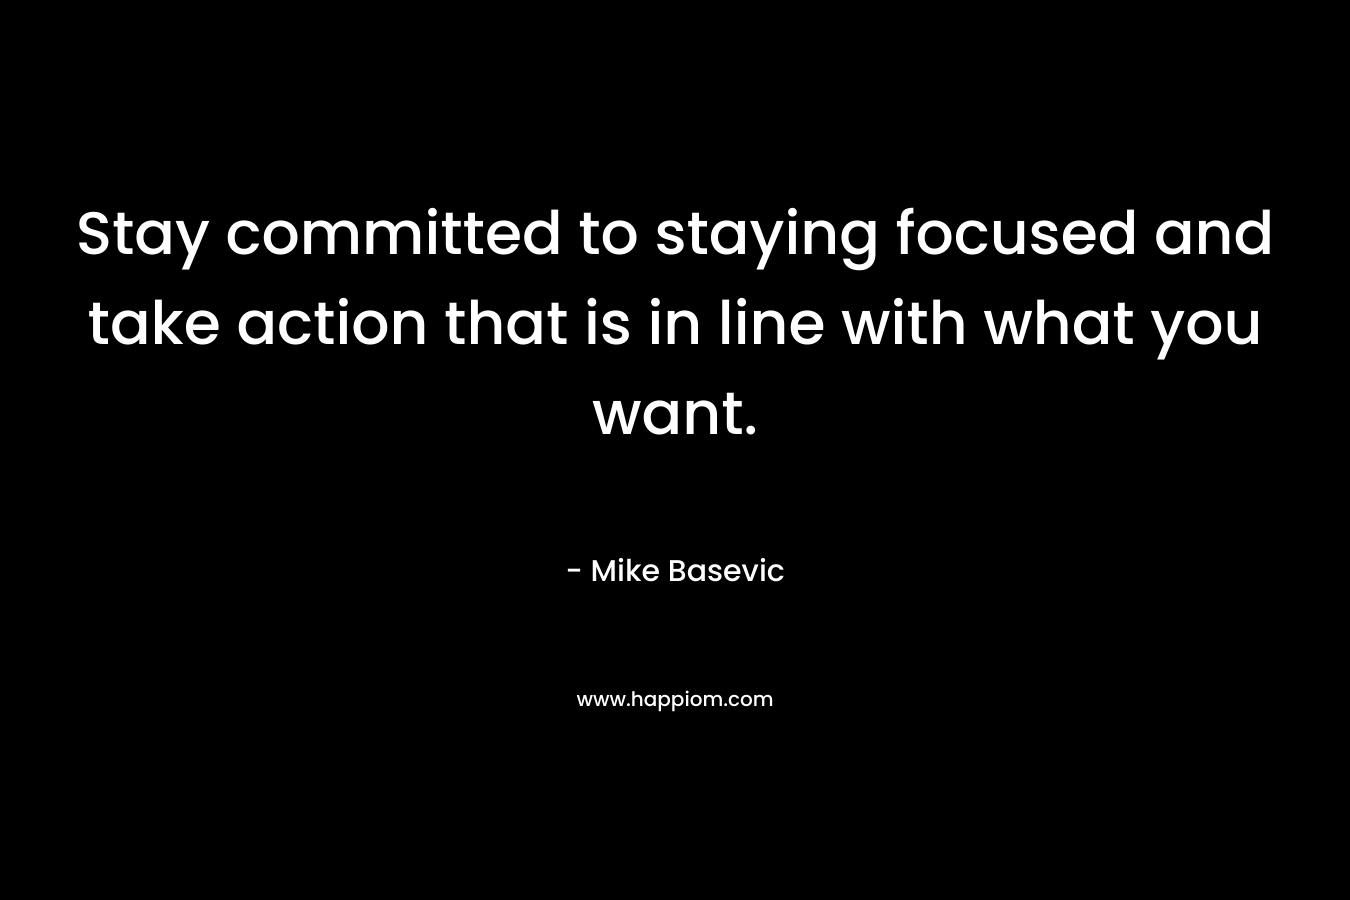 Stay committed to staying focused and take action that is in line with what you want. – Mike Basevic